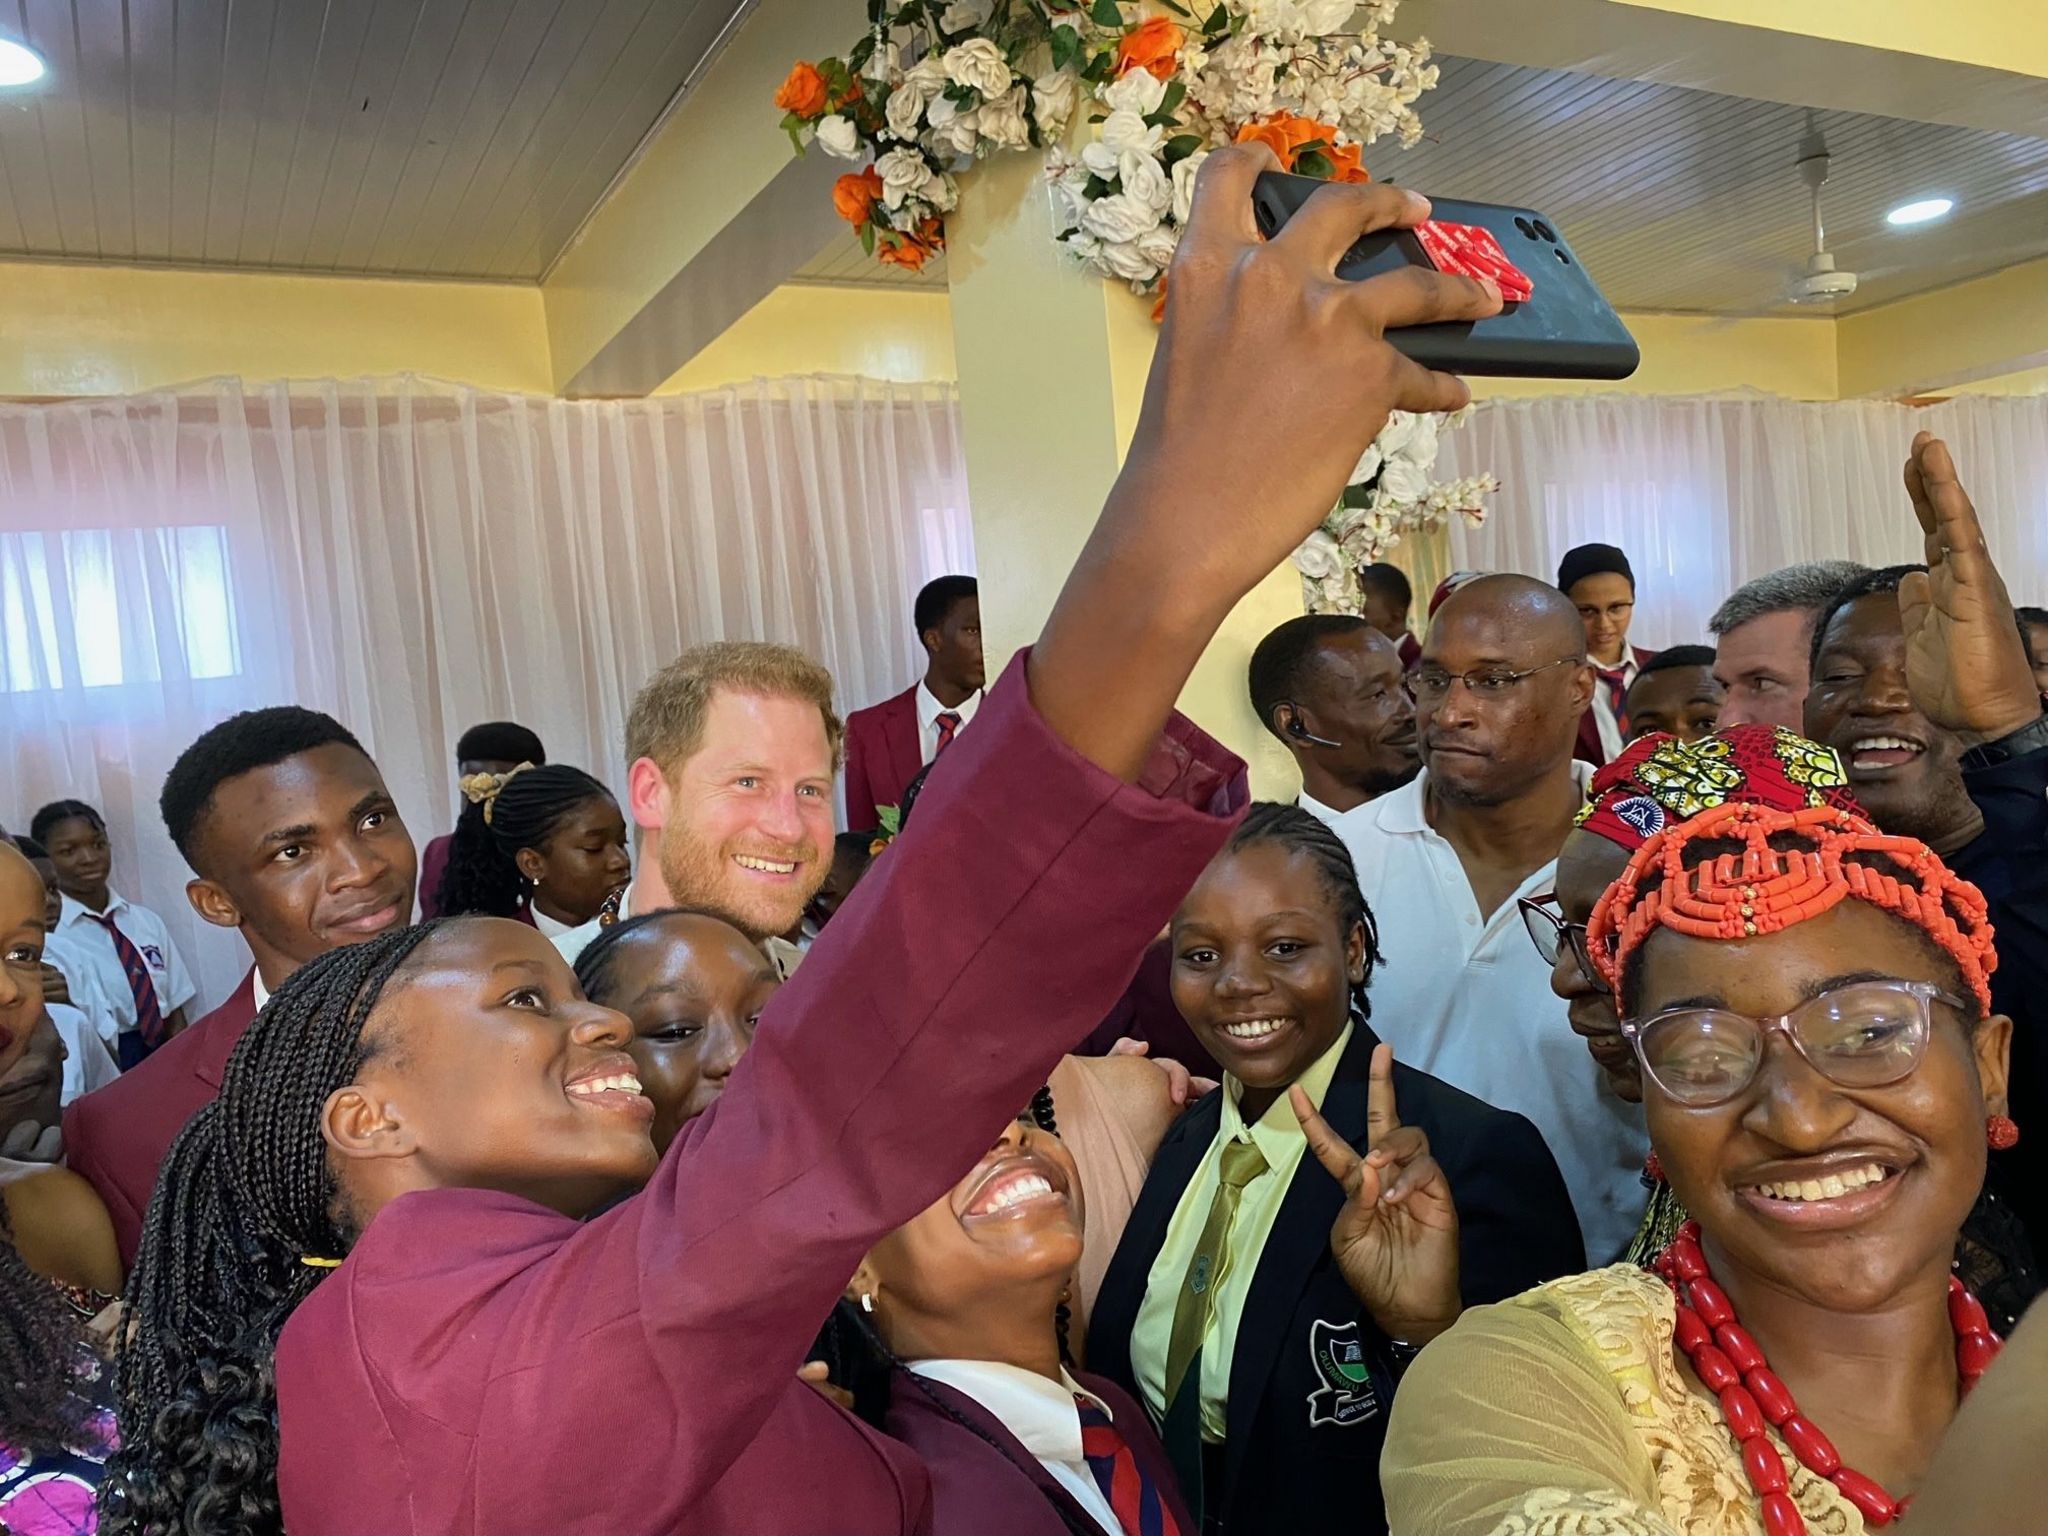 Prince Harry taking a selfie with several students in Abuja